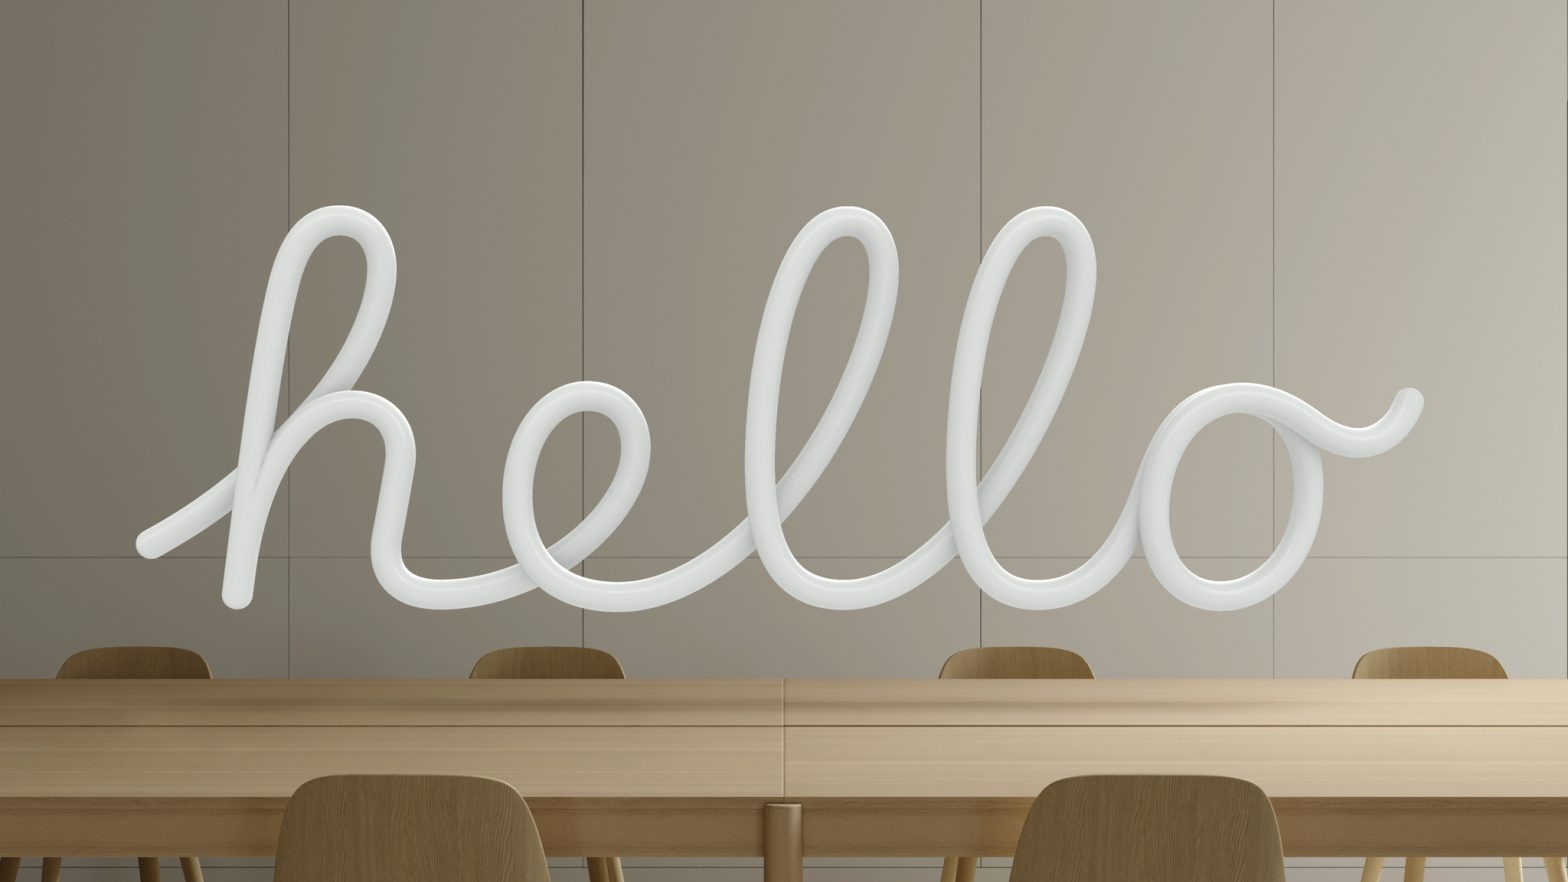 An image with the word “Hello” written in script and floating in 3D space over a light wooden table.